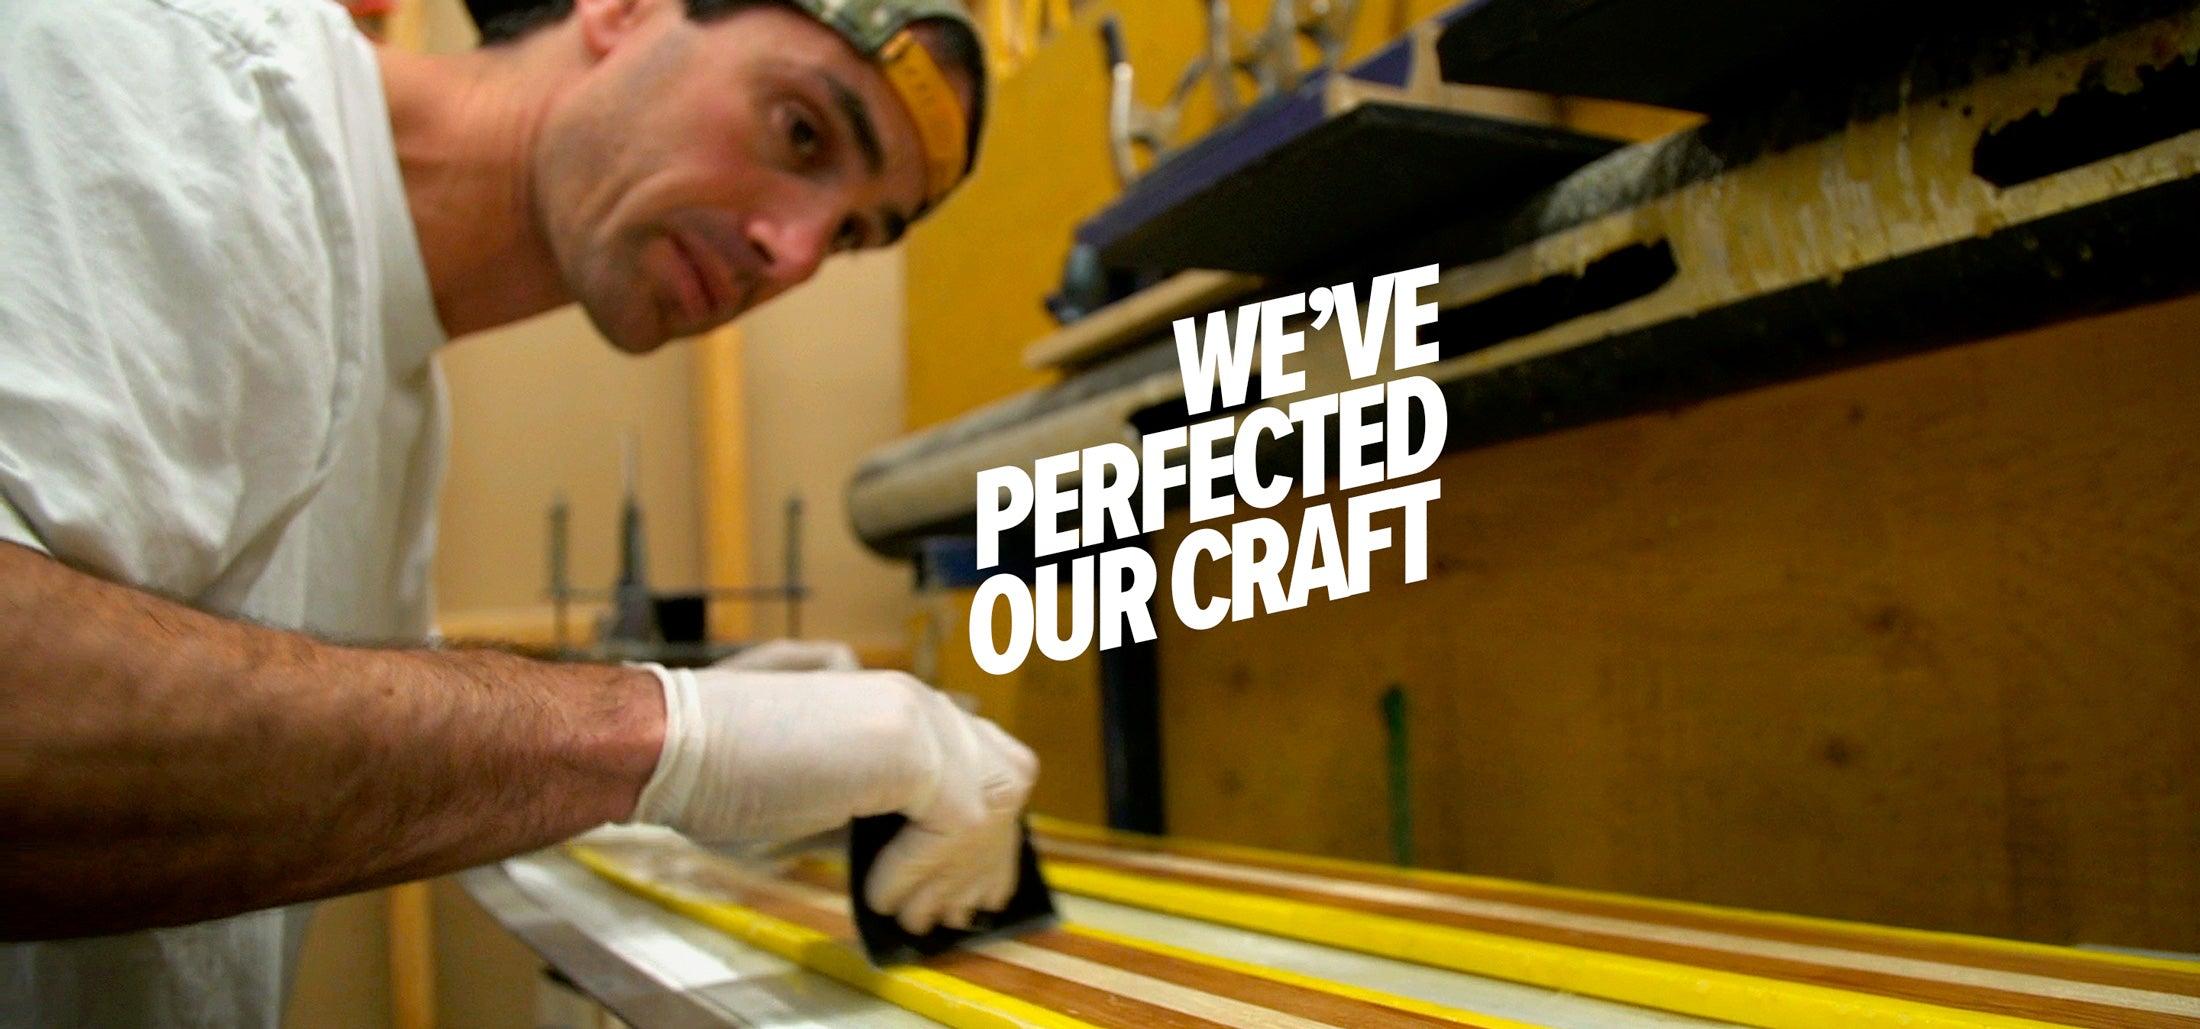 At jskis, we've perfected our craft